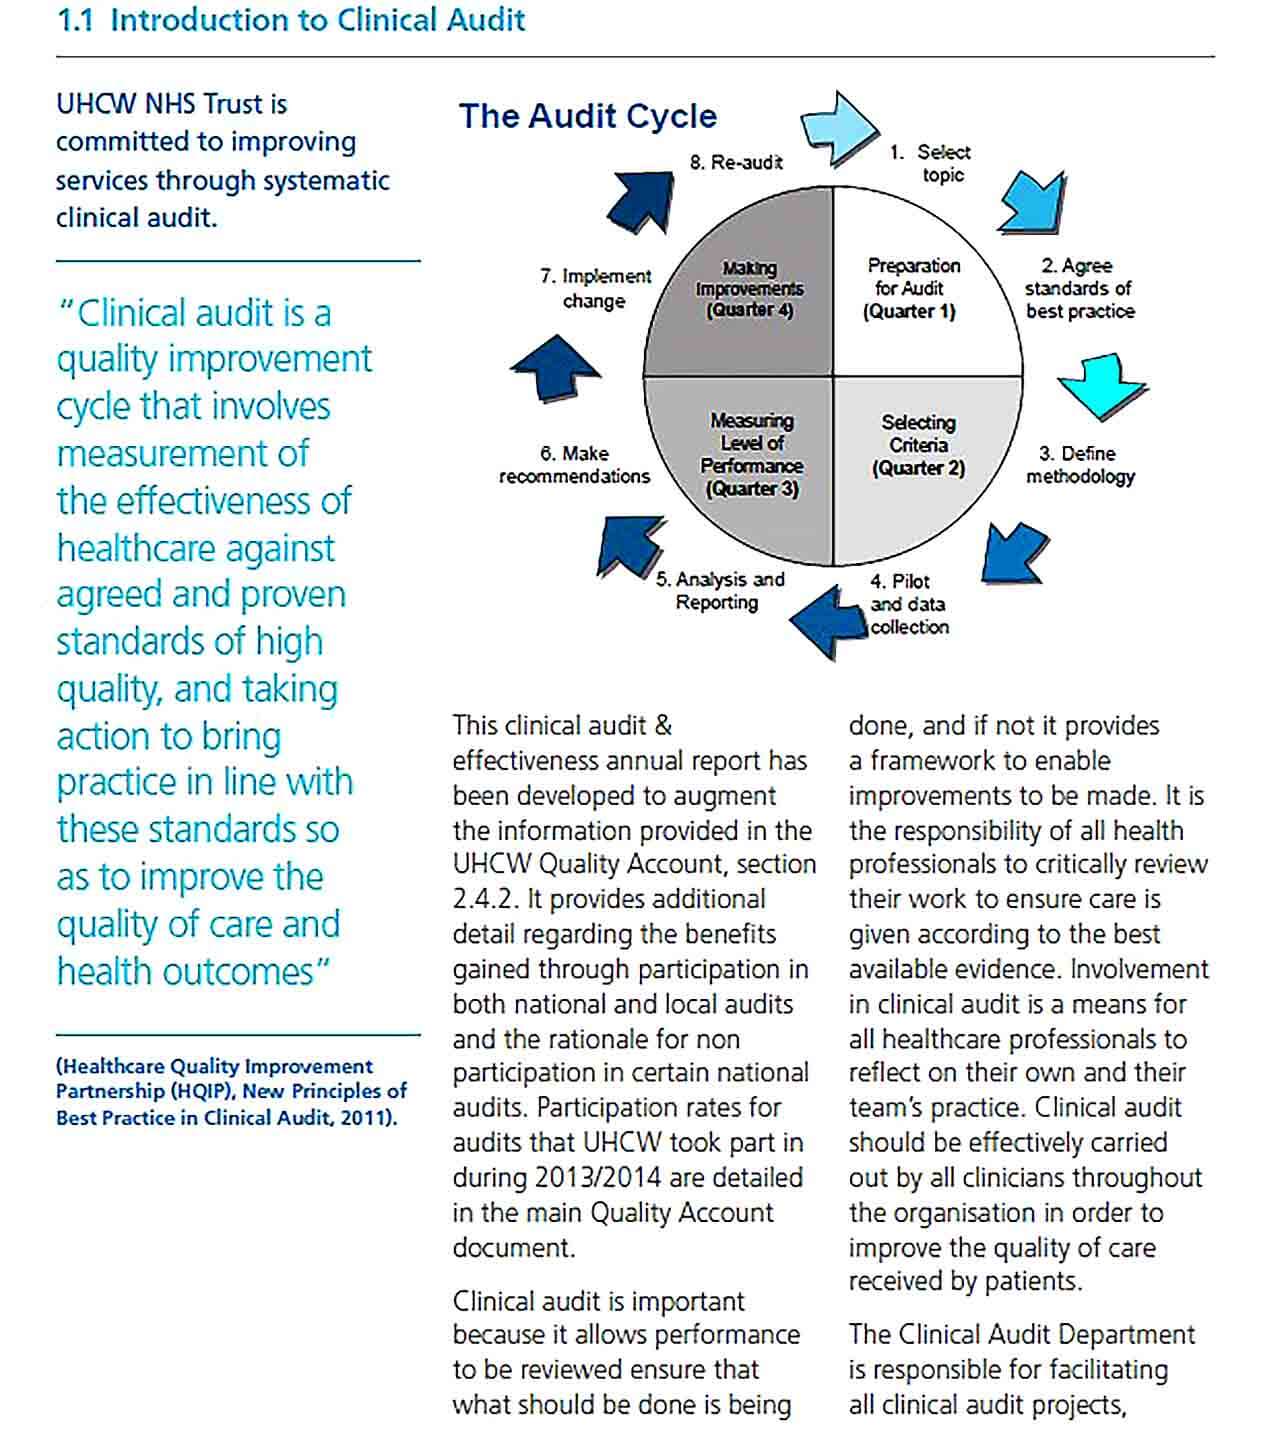 Sample Clinical Audit Effectiveness Annual Report